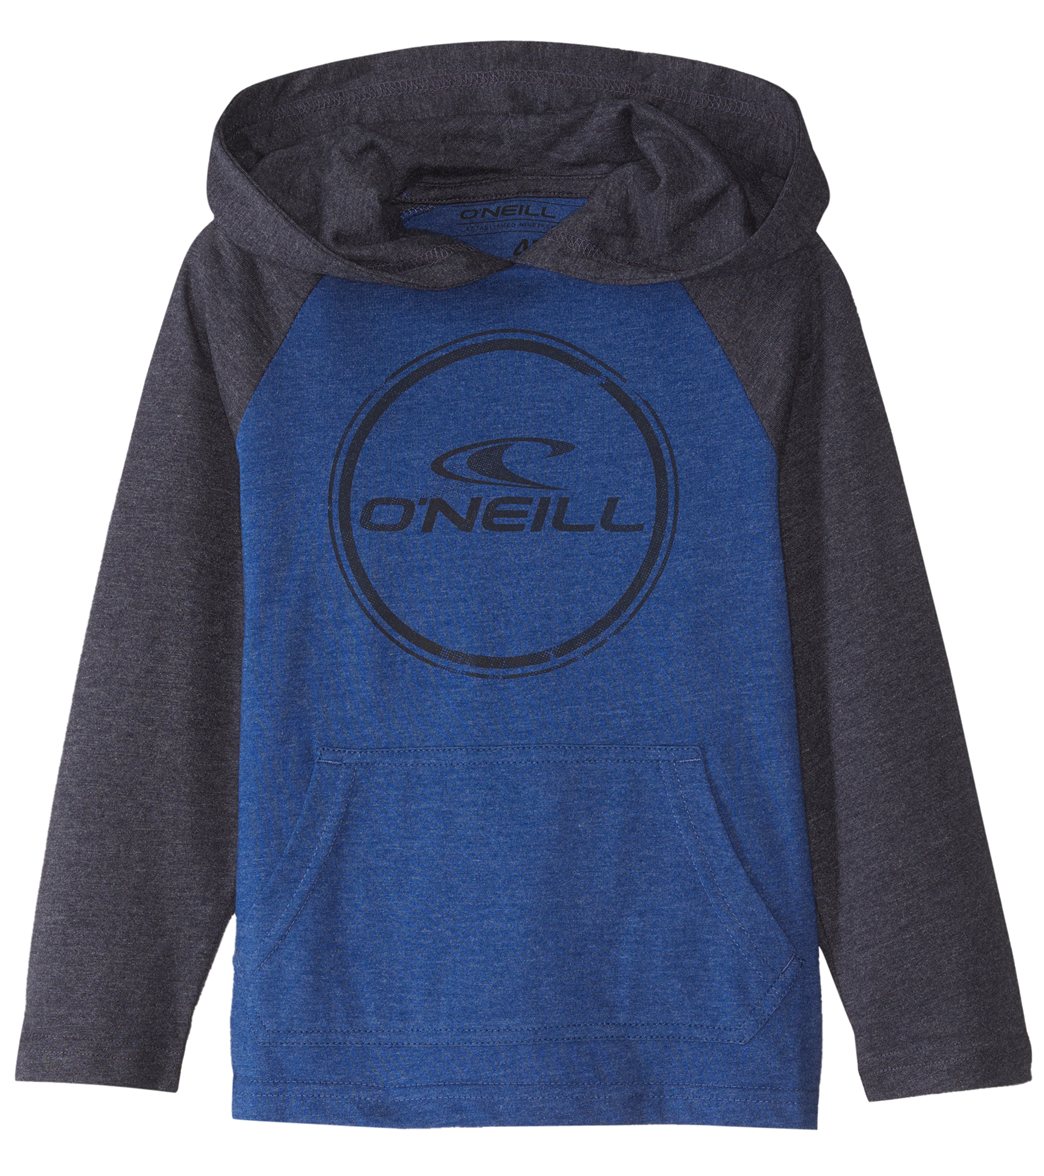 O'neill Boys' Weddle Hooded Pullover Toddler - Royal Blue Xl 7X Cotton/Polyester - Swimoutlet.com